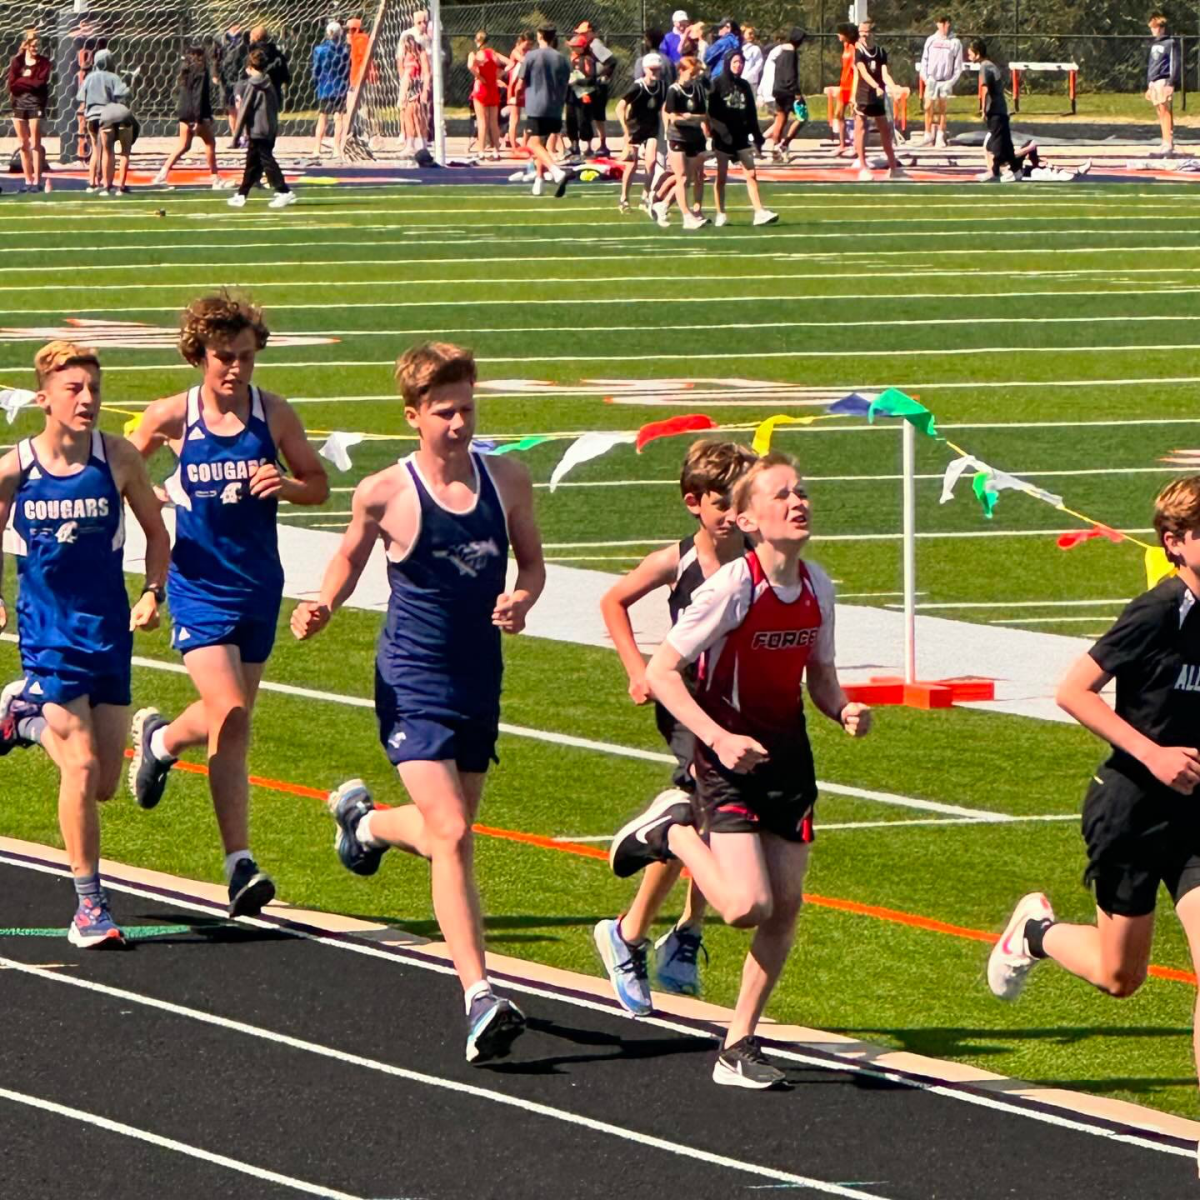 Seventh+grader+Camden+Holley+races+towards+the+finish+line.